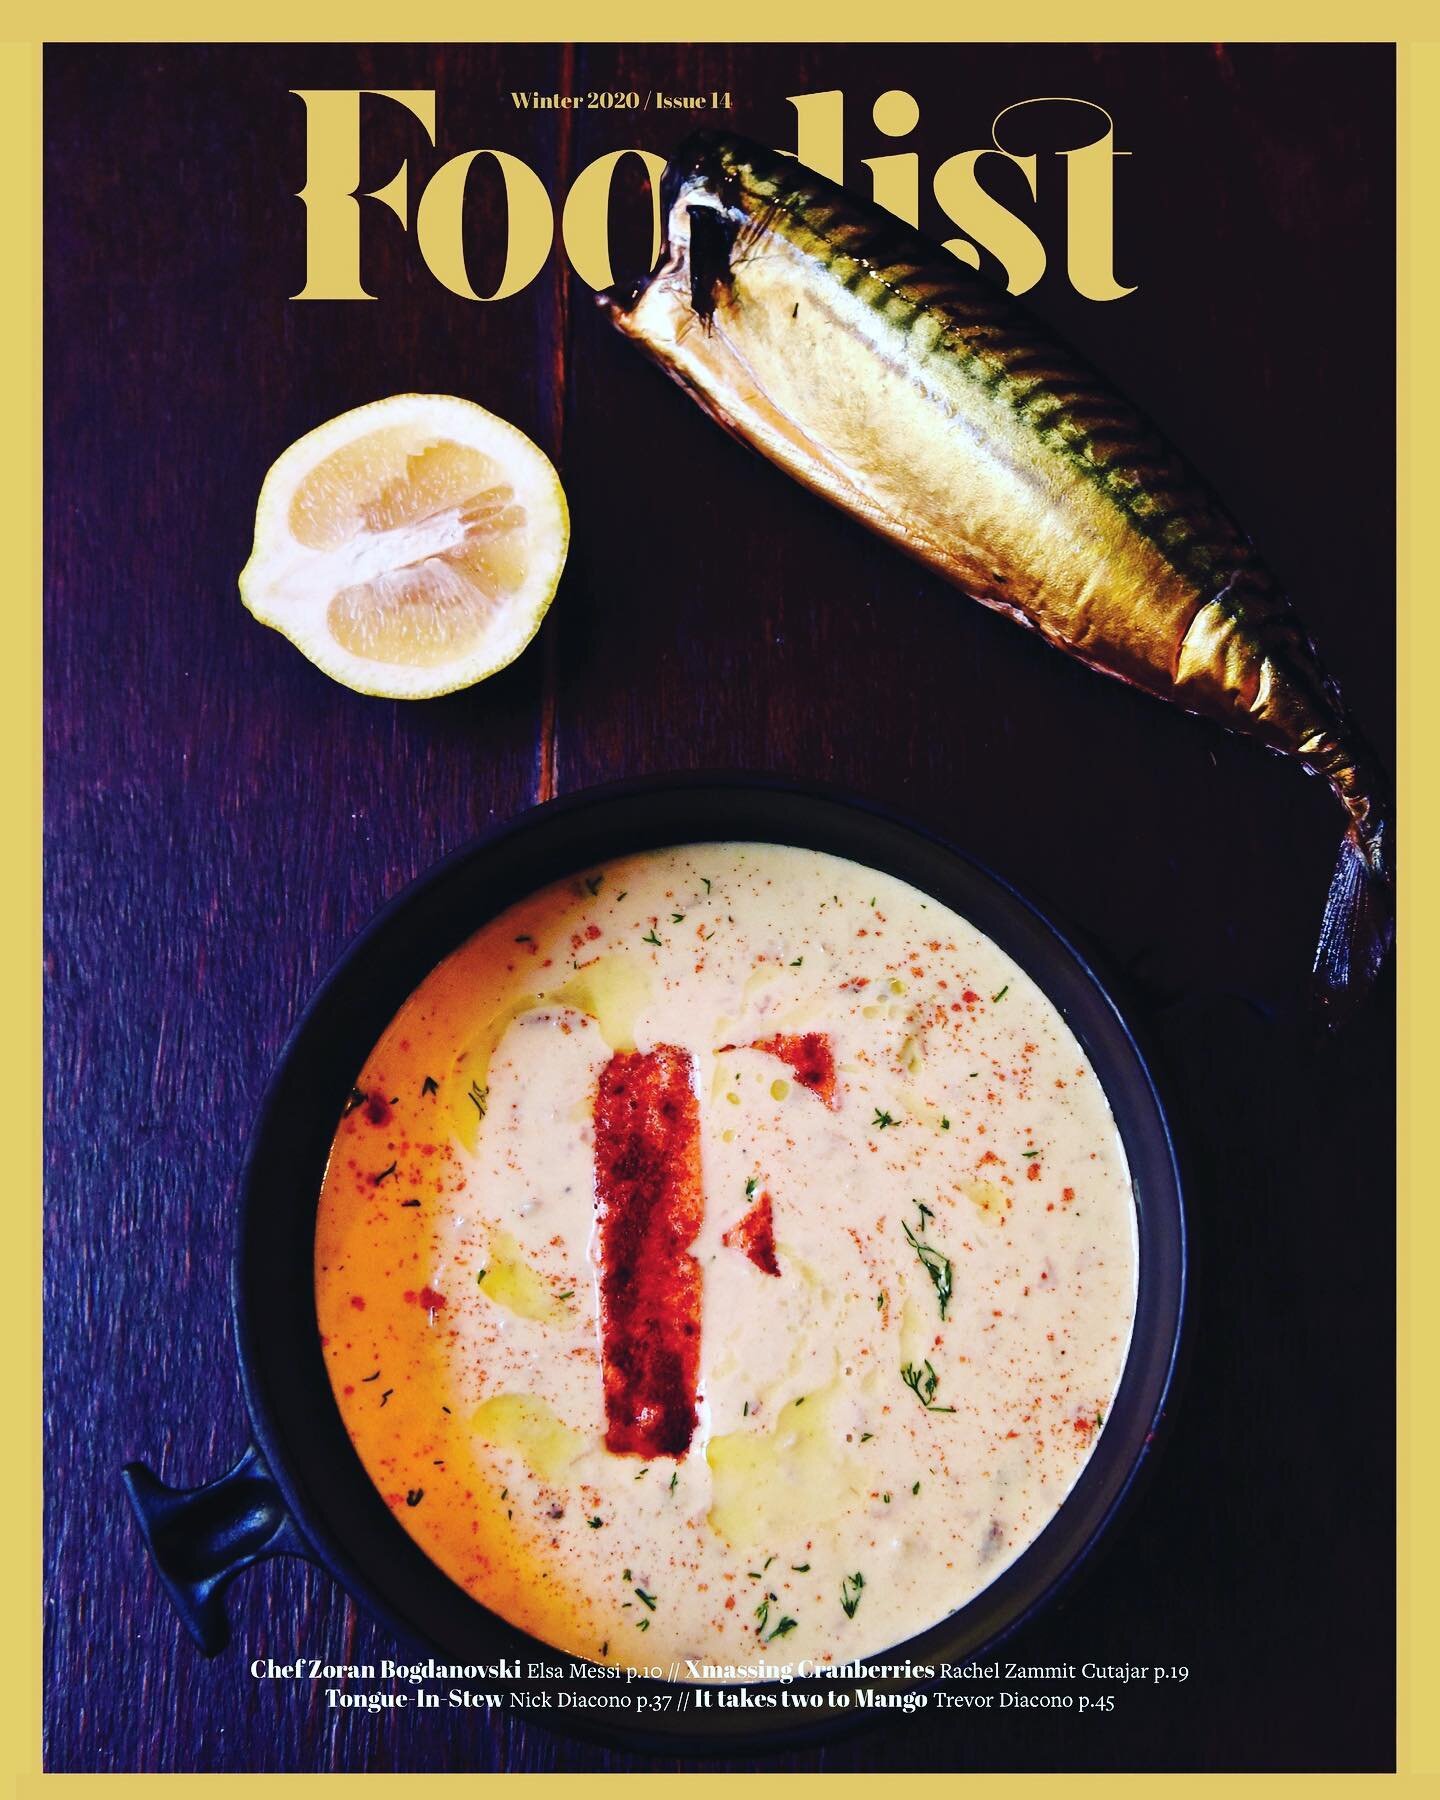 .
Winter edition is up and loaded. Be the first to read the online version now! 🍂 
.
🖥📱 http://bit.ly/Foodist14
.
.
Packed with delicious recipes 🍽 📖 👨&zwj;🍳👩&zwj;🍳
.
#eardrinkread #foodist #parktowerssupermarkets